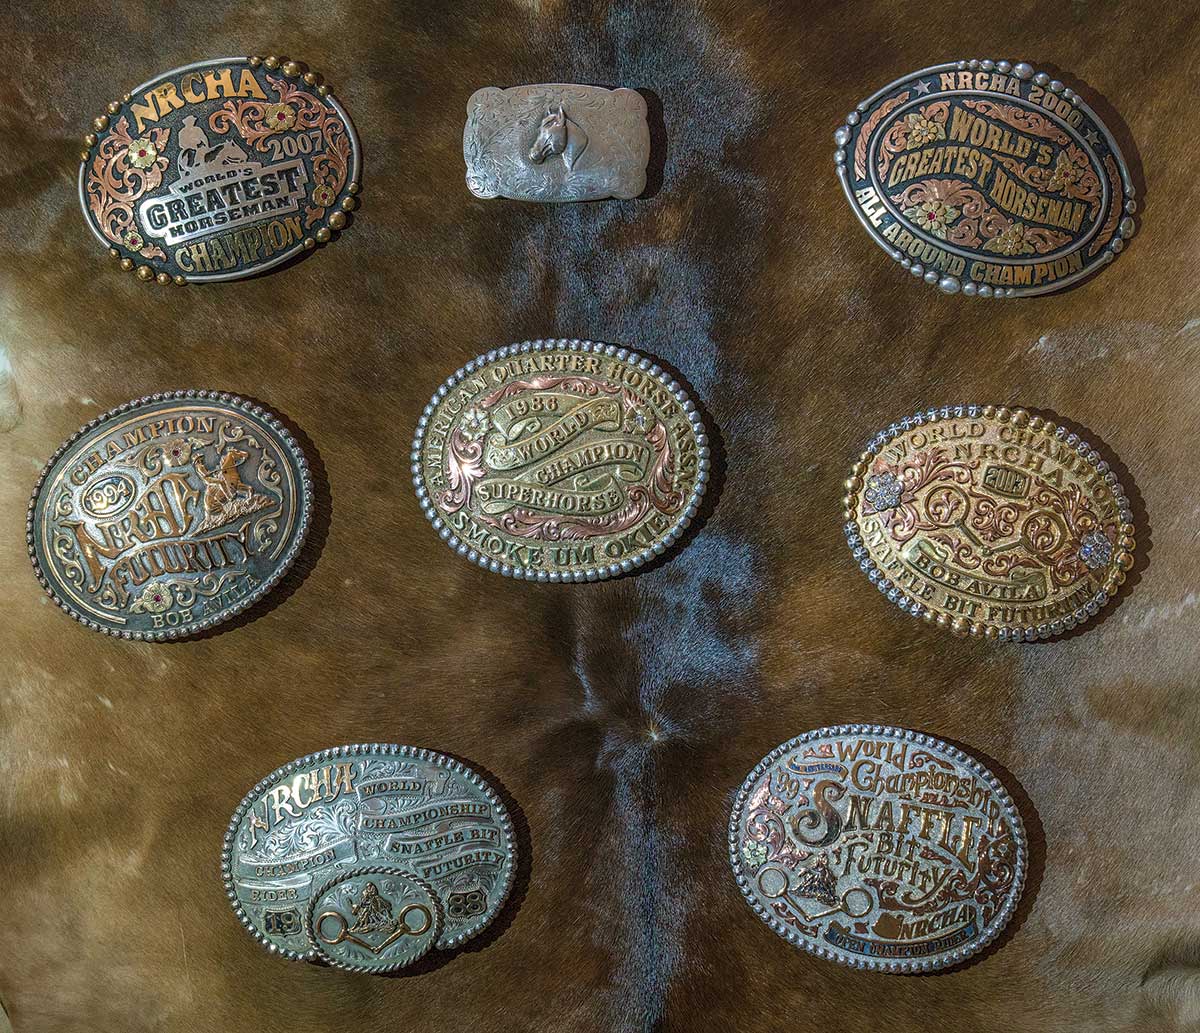 Rodeo Remembers: Rodeo Belt Buckle 